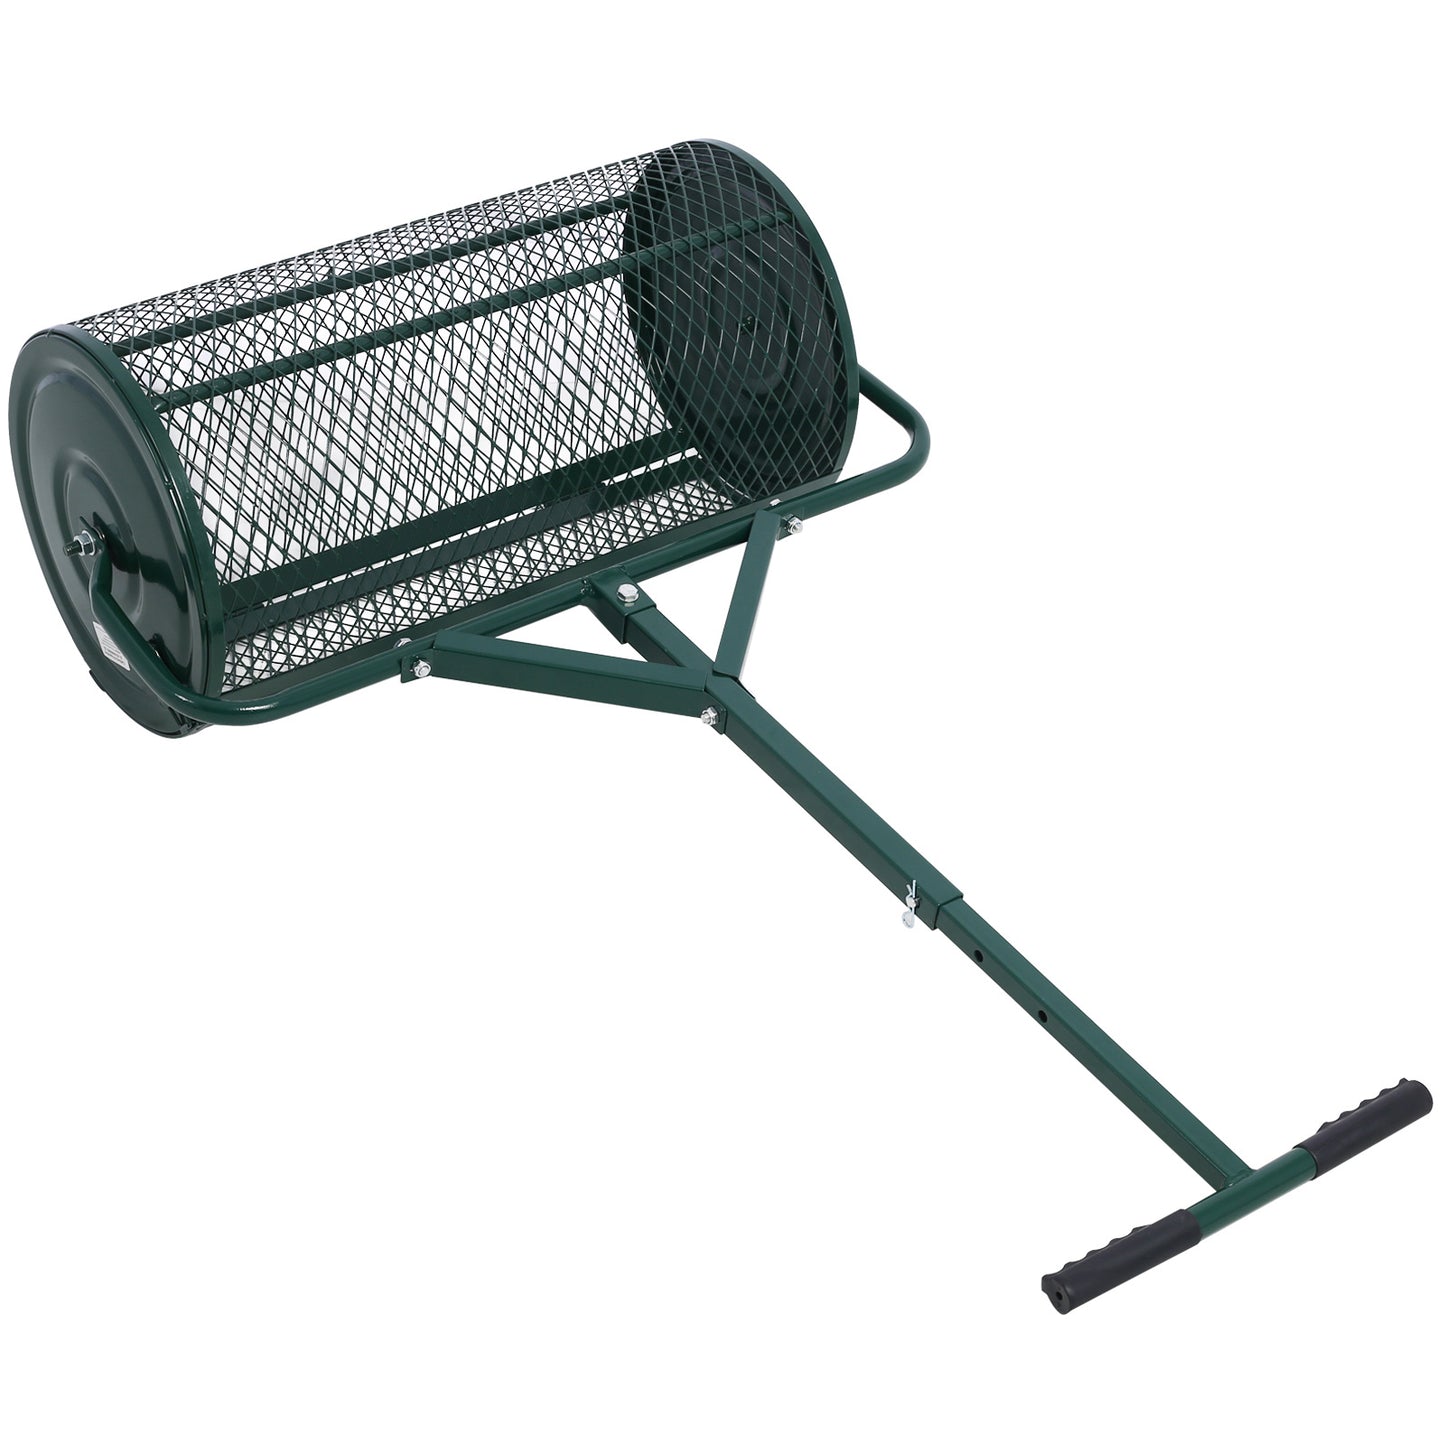 Peat Moss Spreader 24inch,Compost Spreader Metal Mesh,T shaped Handle for planting seeding,Lawn and Garden Care Manure Spreaders Roller